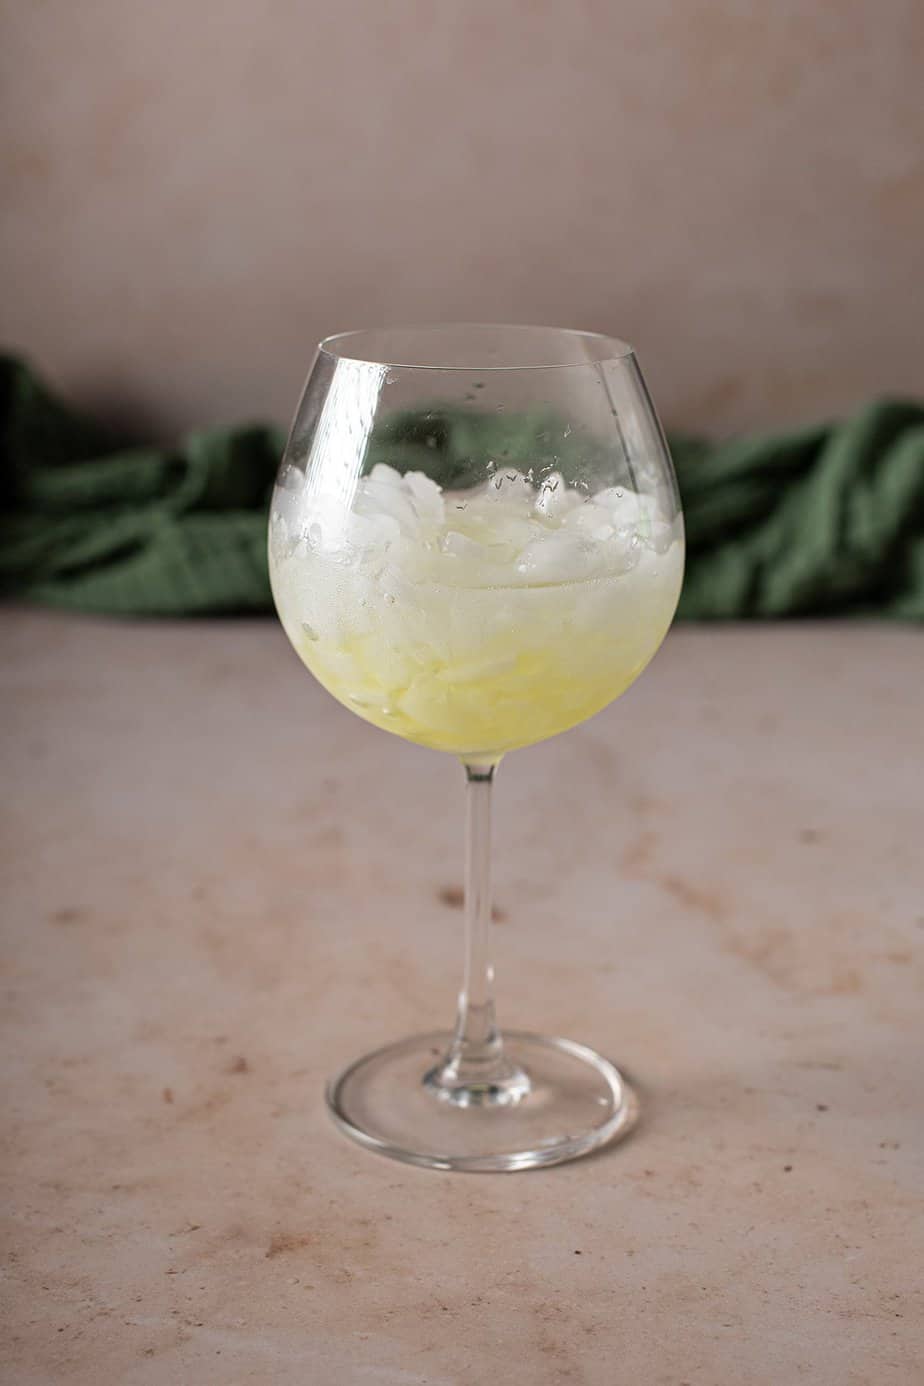 large wine glass filled with crushed ice and some limoncello and lemon juice